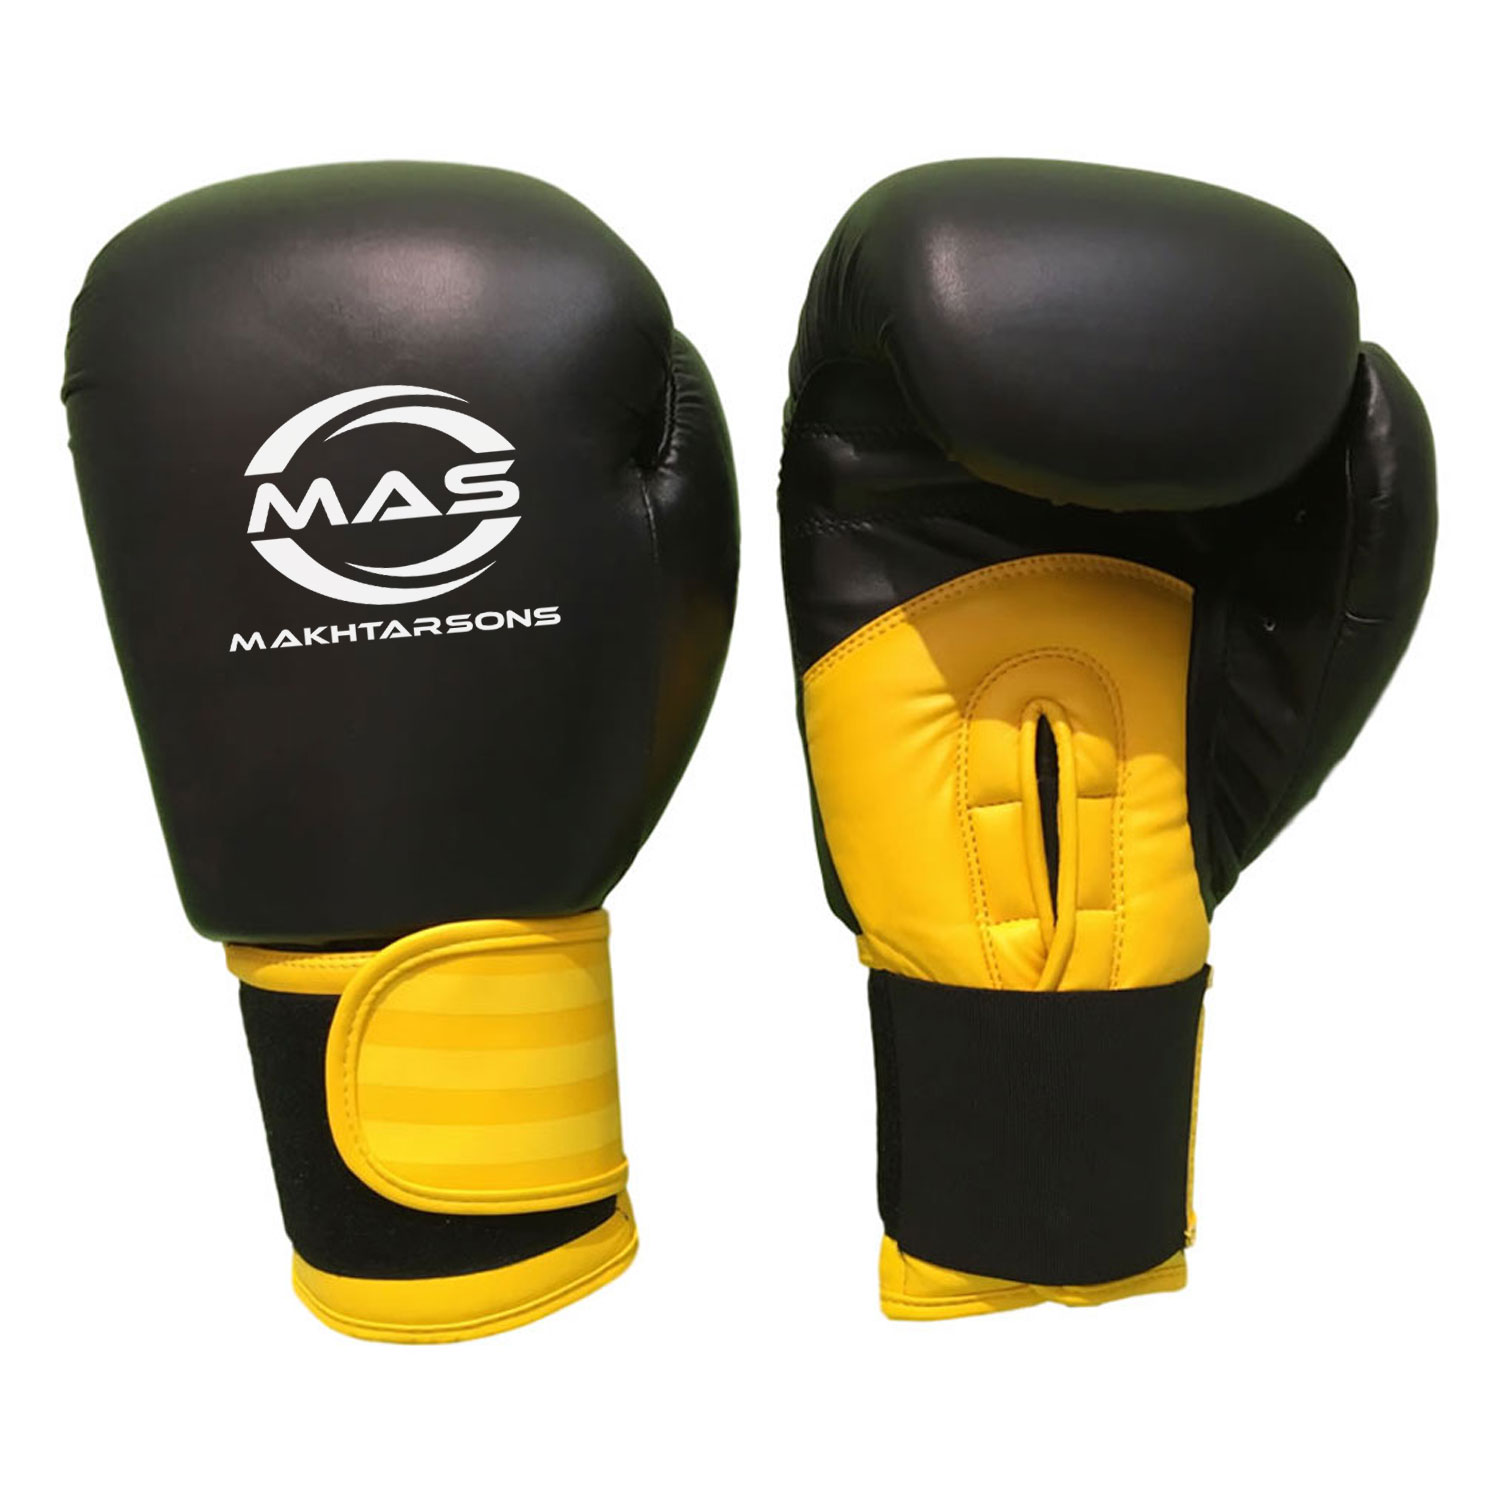 PROFESSIONAL BOXING GLOVES | MAS 209